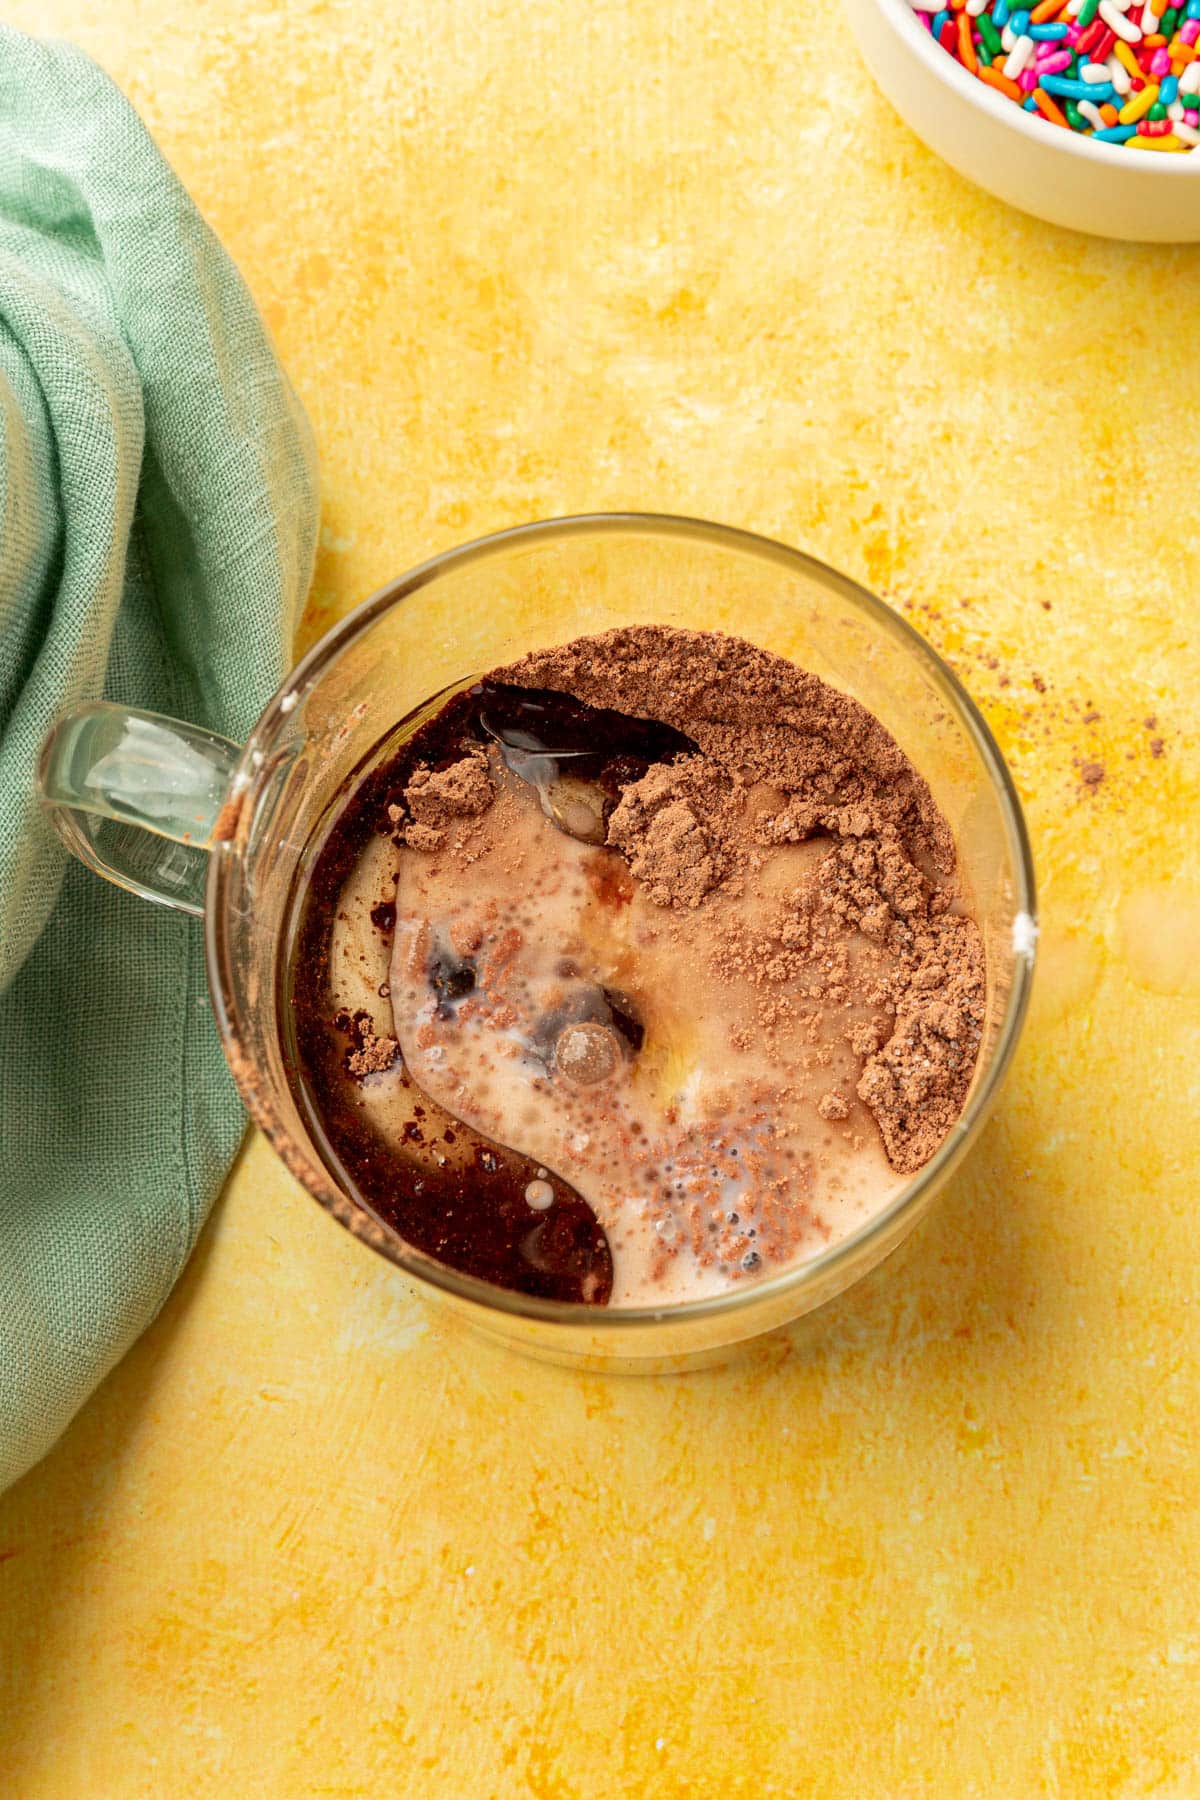 Cocoa powder, almond milk, oil, and vanilla in a glass mug before mixing together to make a gluten-free mug cake.